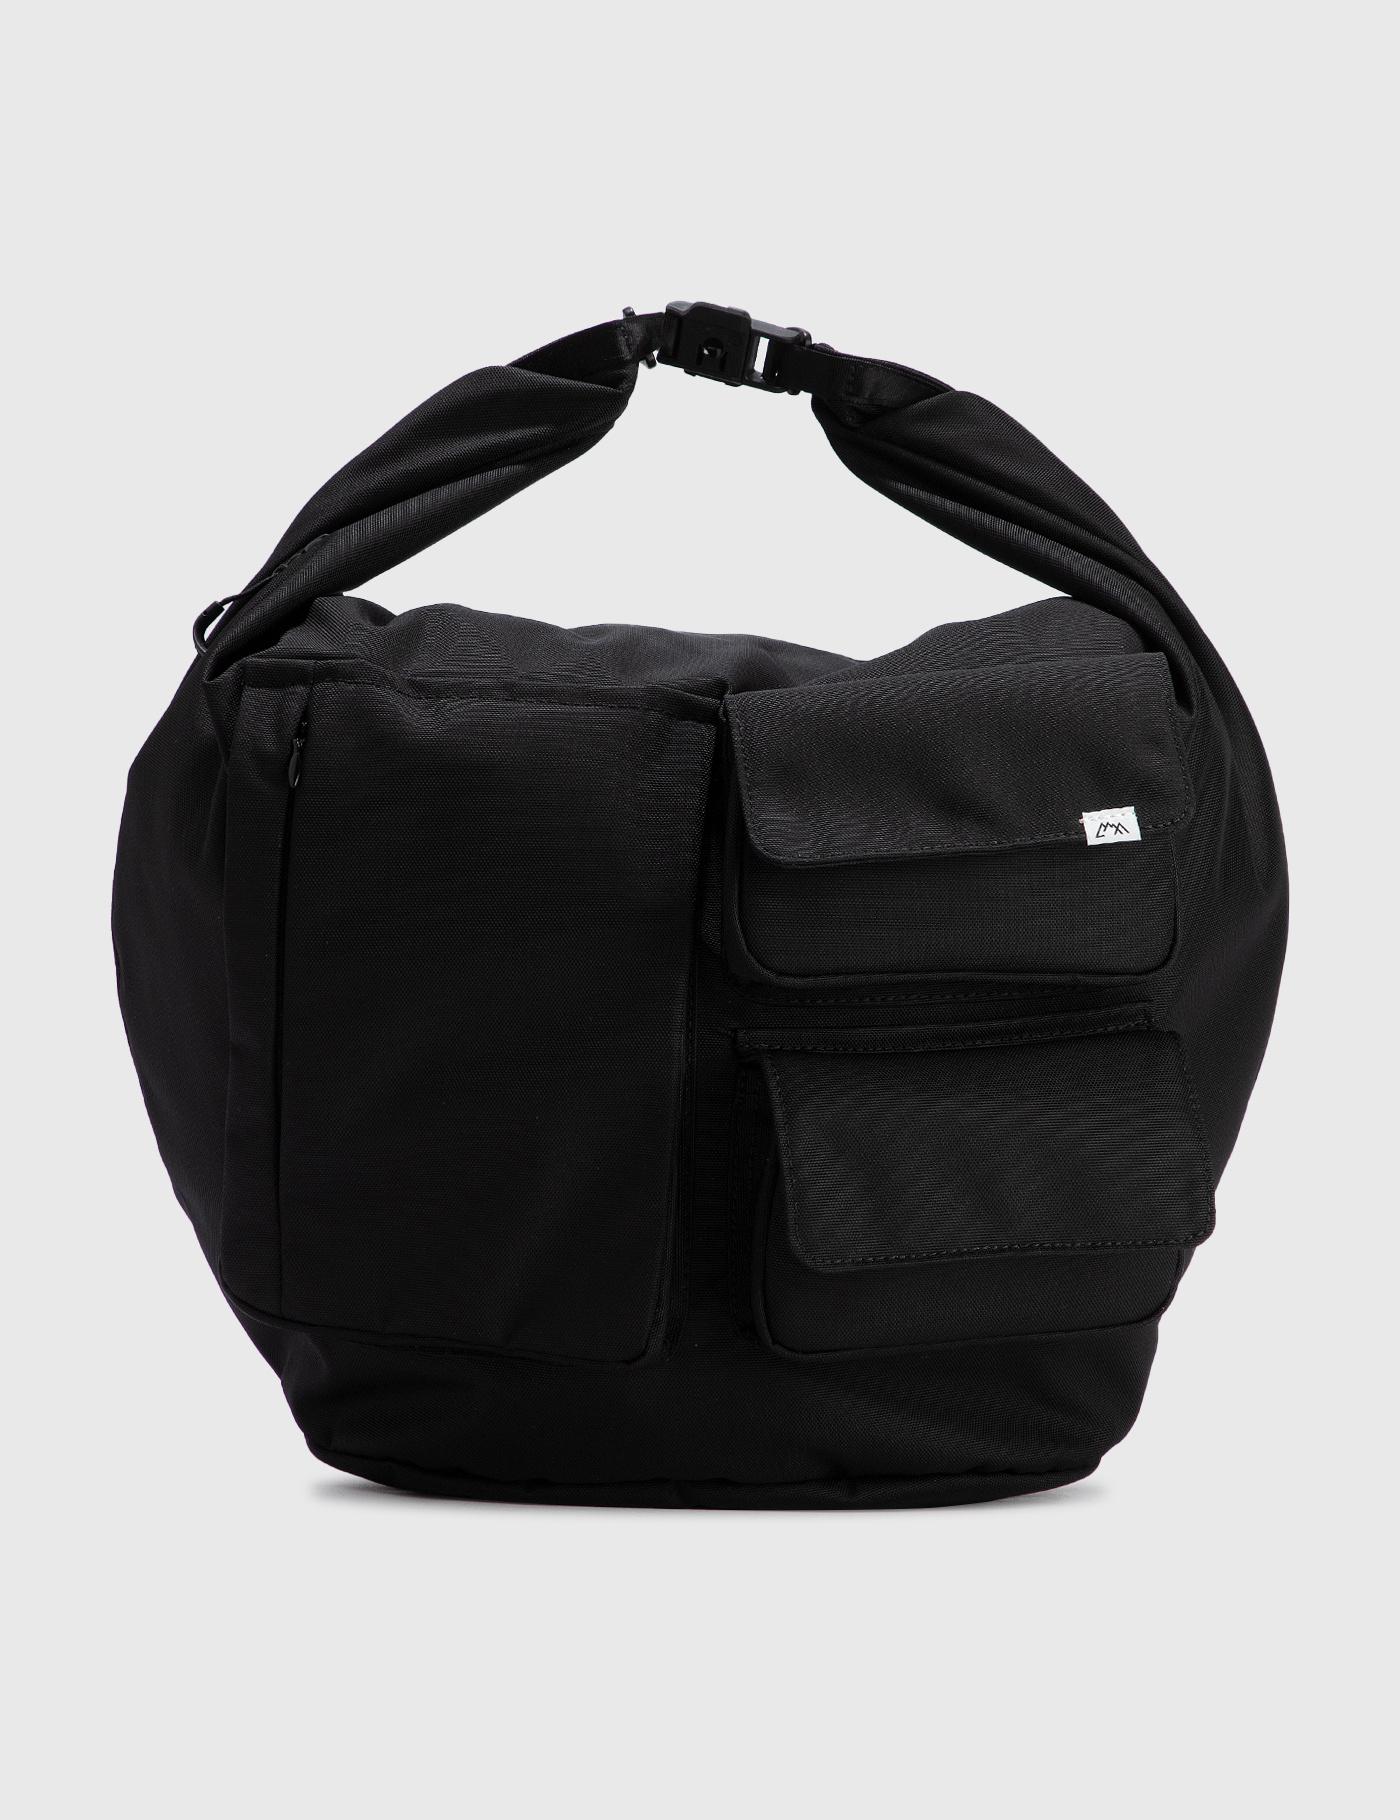 Roll Bag by COMFY OUTDOOR GARMENT